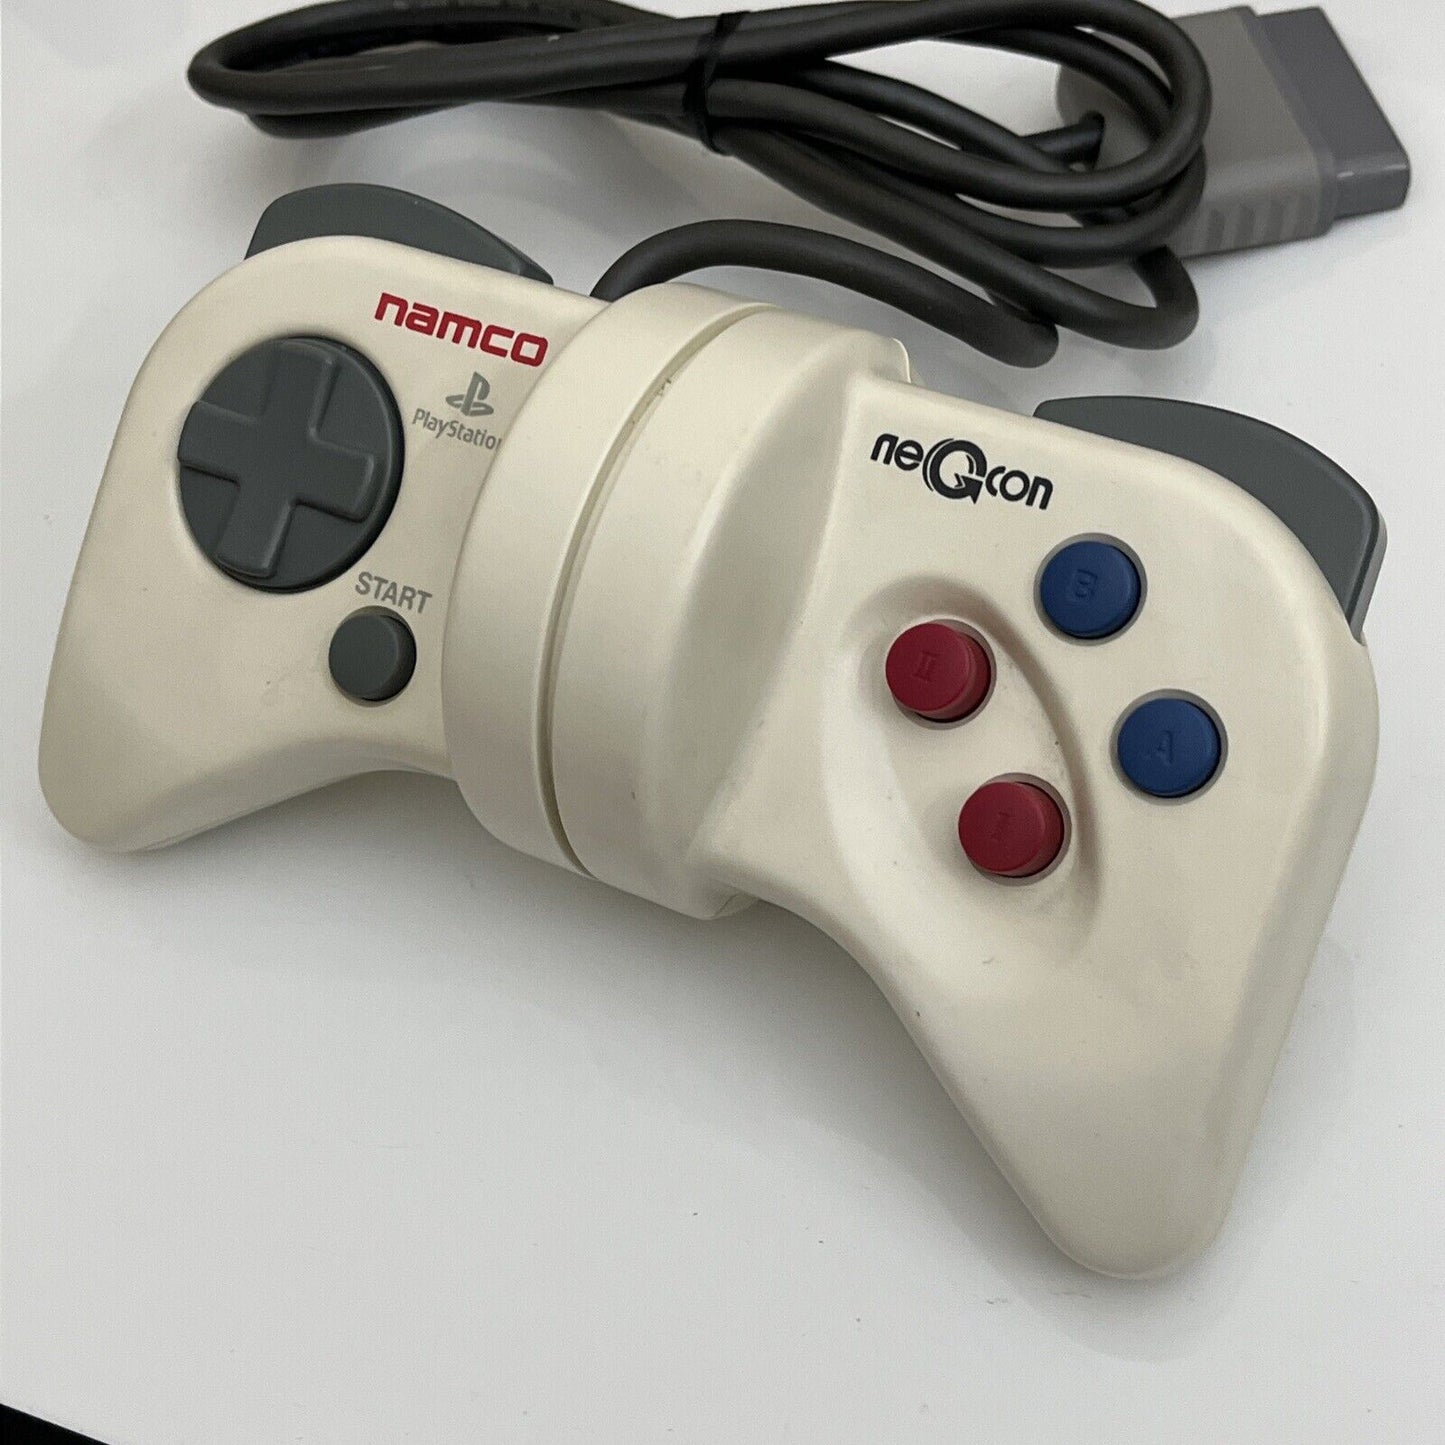 Genuine NAMCO Sony PlayStation 1 PS1 Negcon Controller White